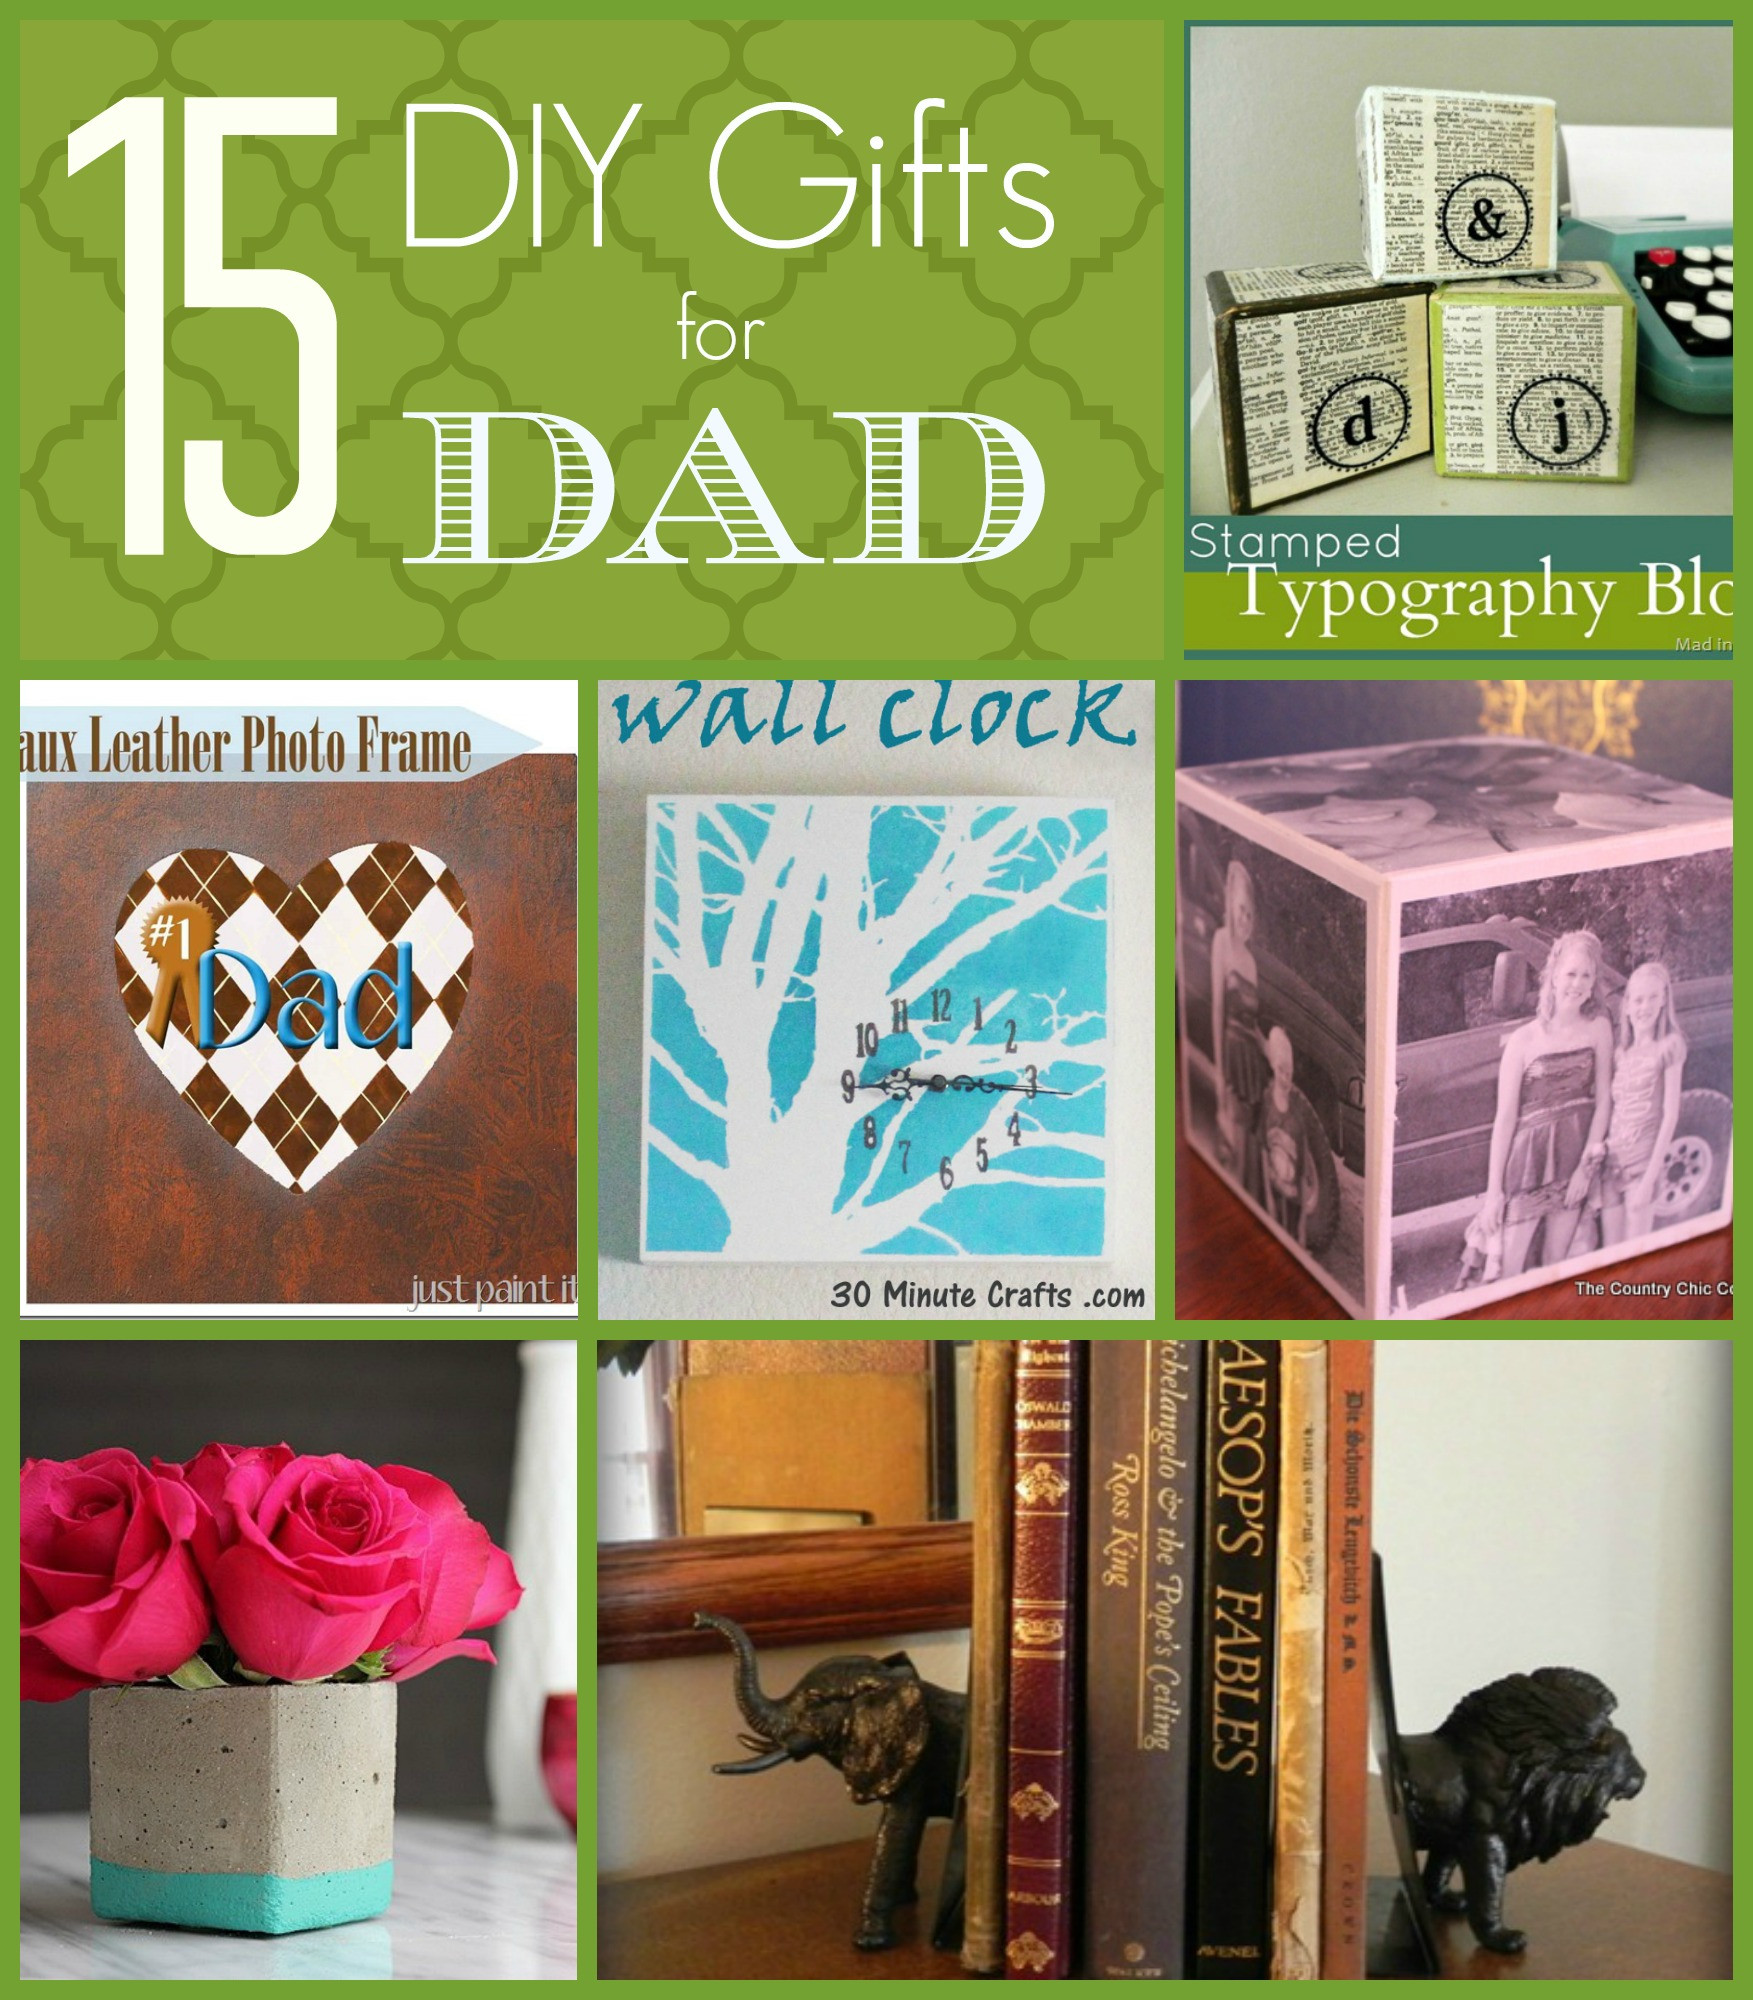 DIY Christmas Presents For Dad
 15 DIY Gift Ideas for Dad Just Paint It Blog